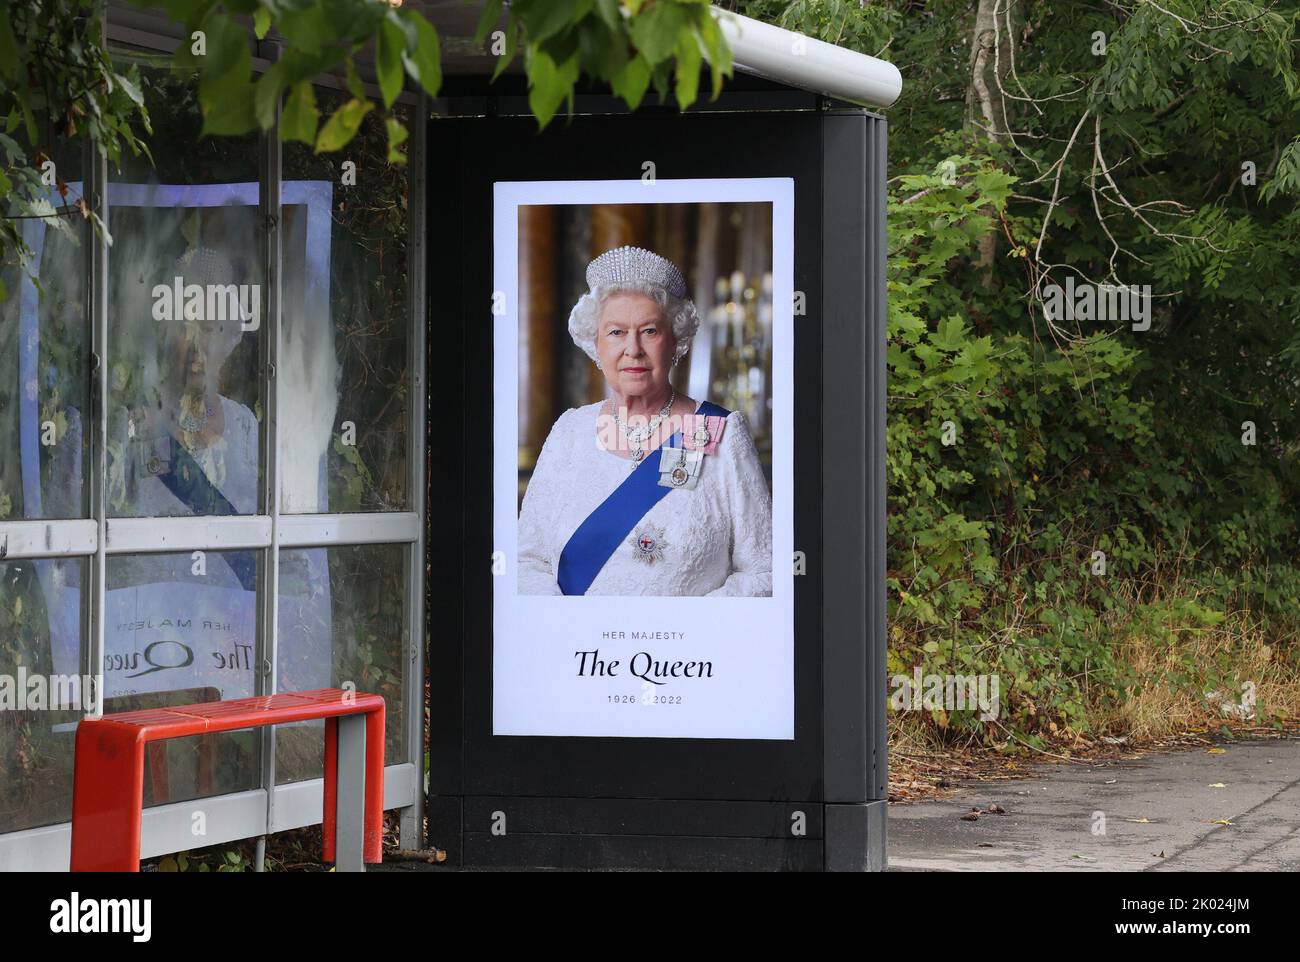 Craigavon, County Armagh, Northern Ireland, UK. 09 Sep 2022. Northern Ireland mourns the death of Her Majesty Queen Elizabeth II. A tribute to Her Majesty on a display at a rural bus stop as the public mourn the loss of our monarch who died yesterday. Credit: CAZIMB/Alamy Live News. Stock Photo